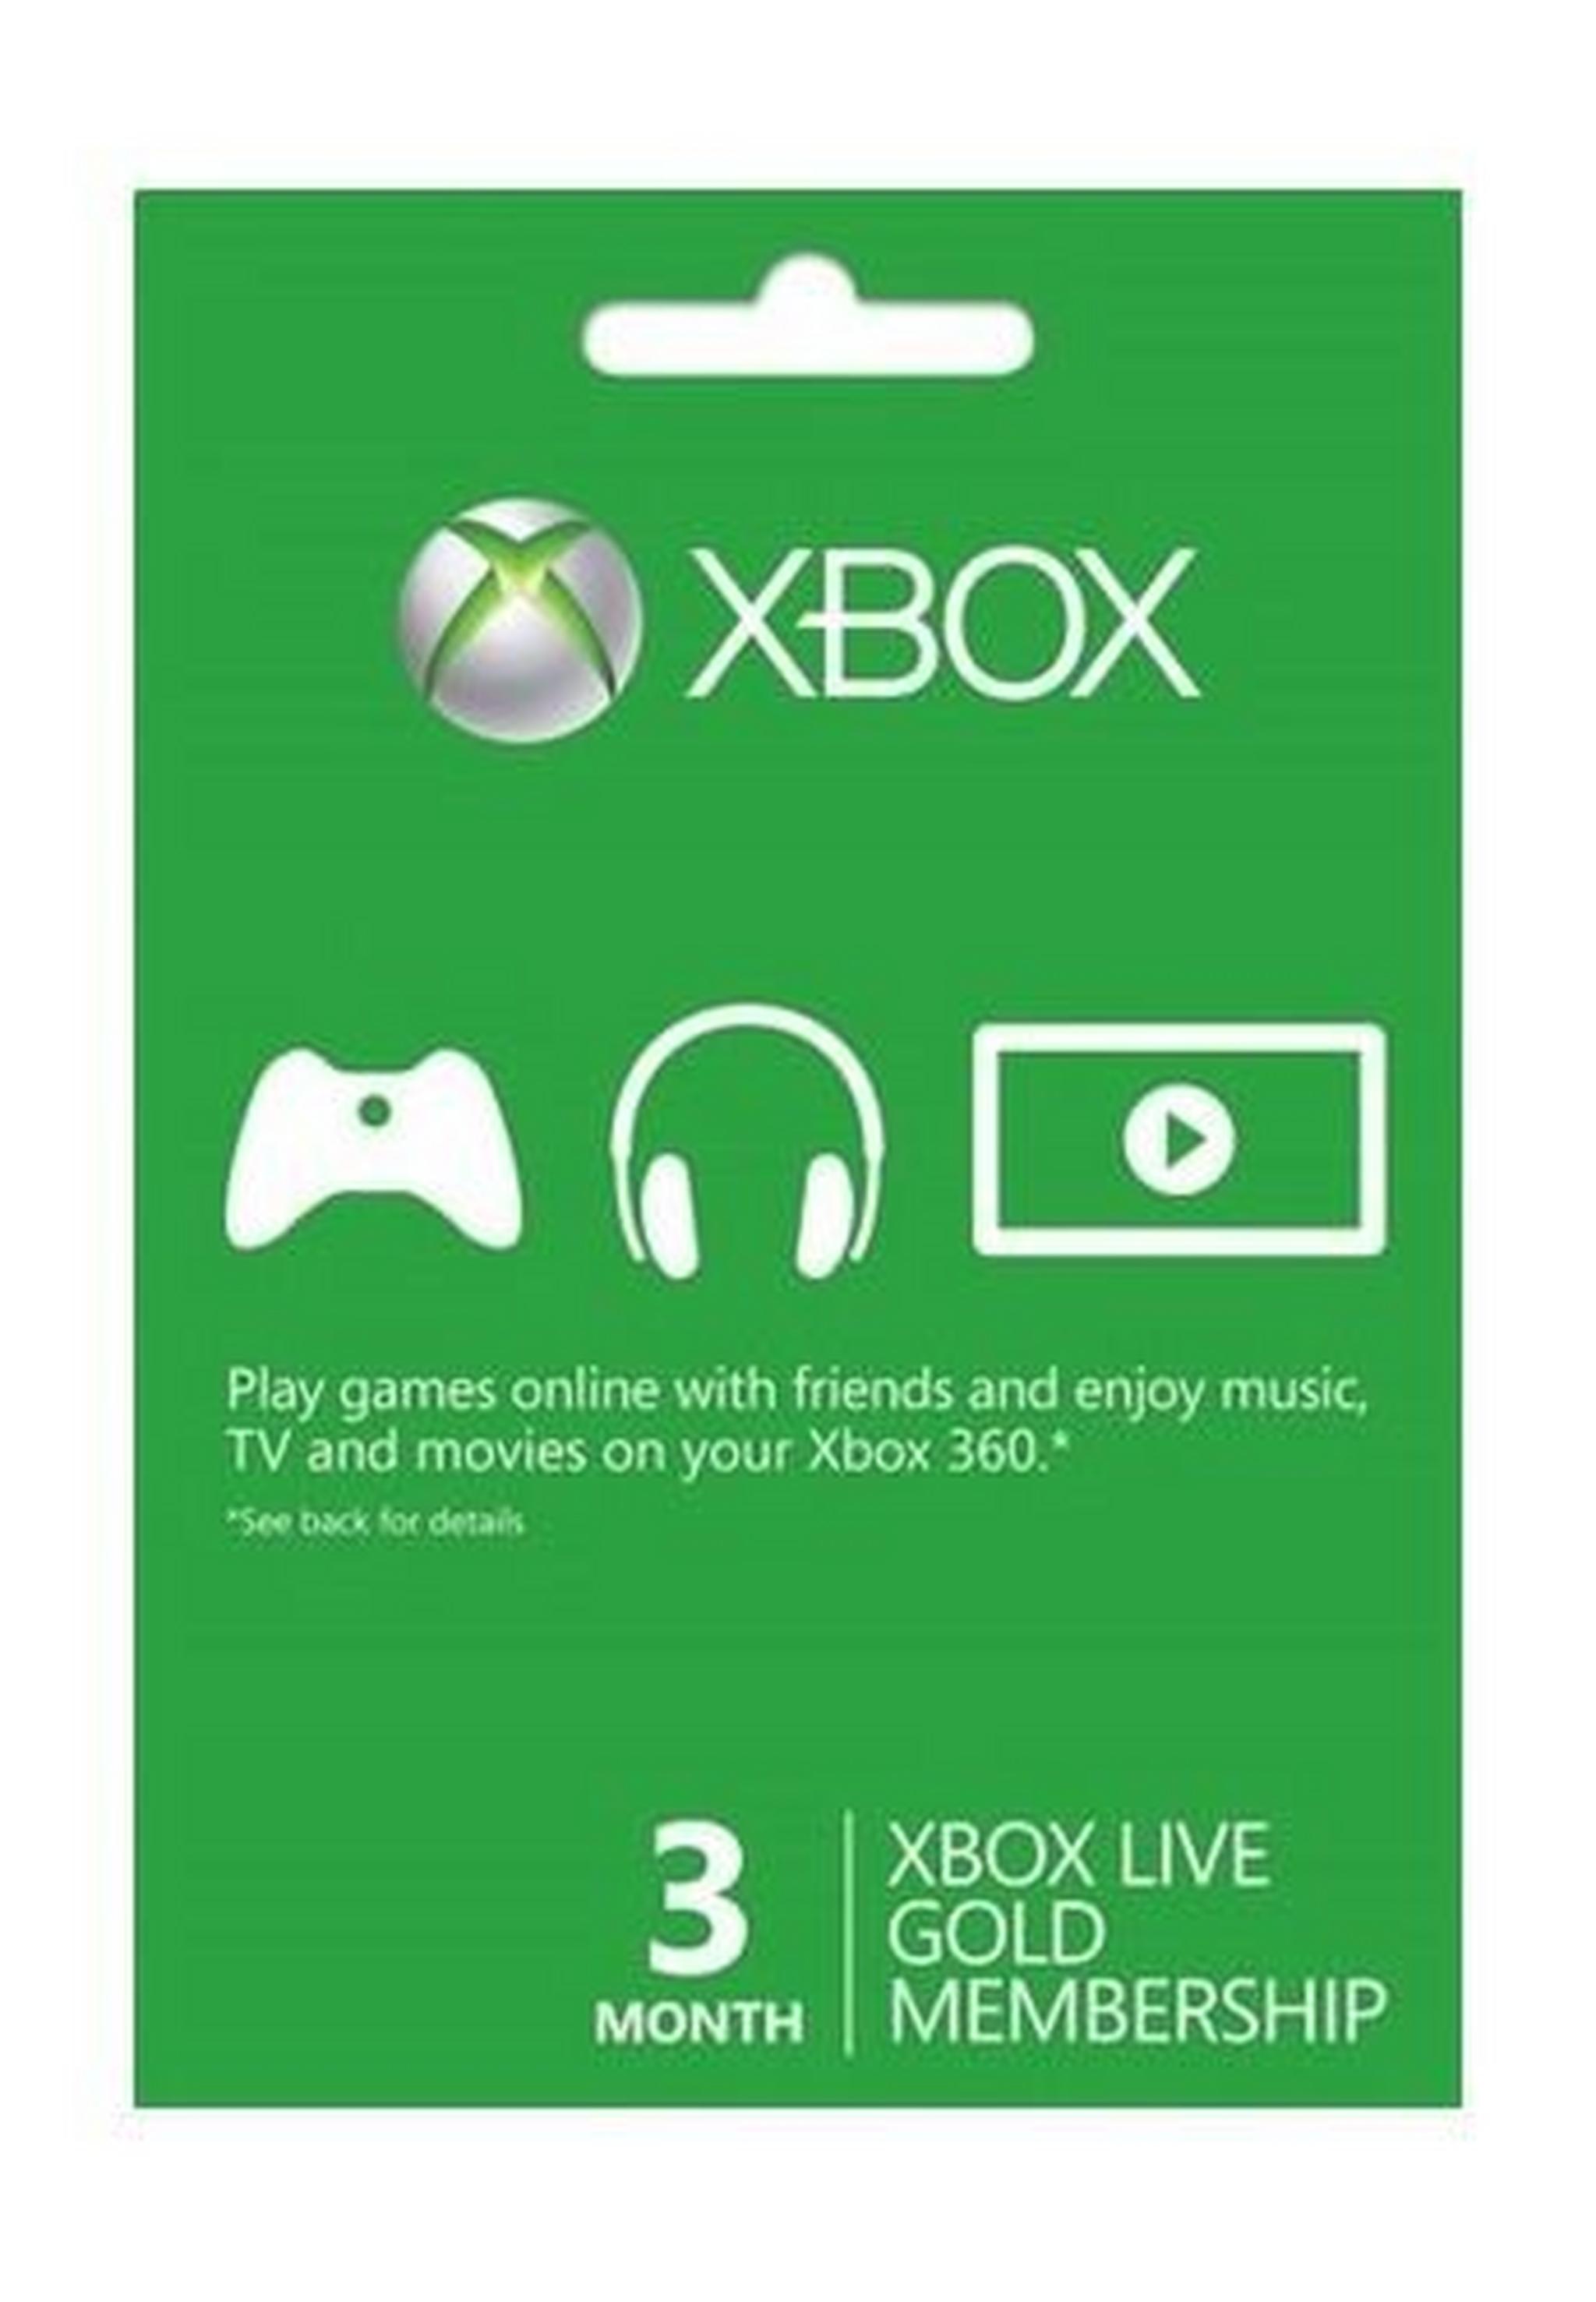 Microsoft Xbox One 500GB Console With Kinect Sensor + 2 Games + 1 Controller + 3 Month Xbox Live Gold Membership